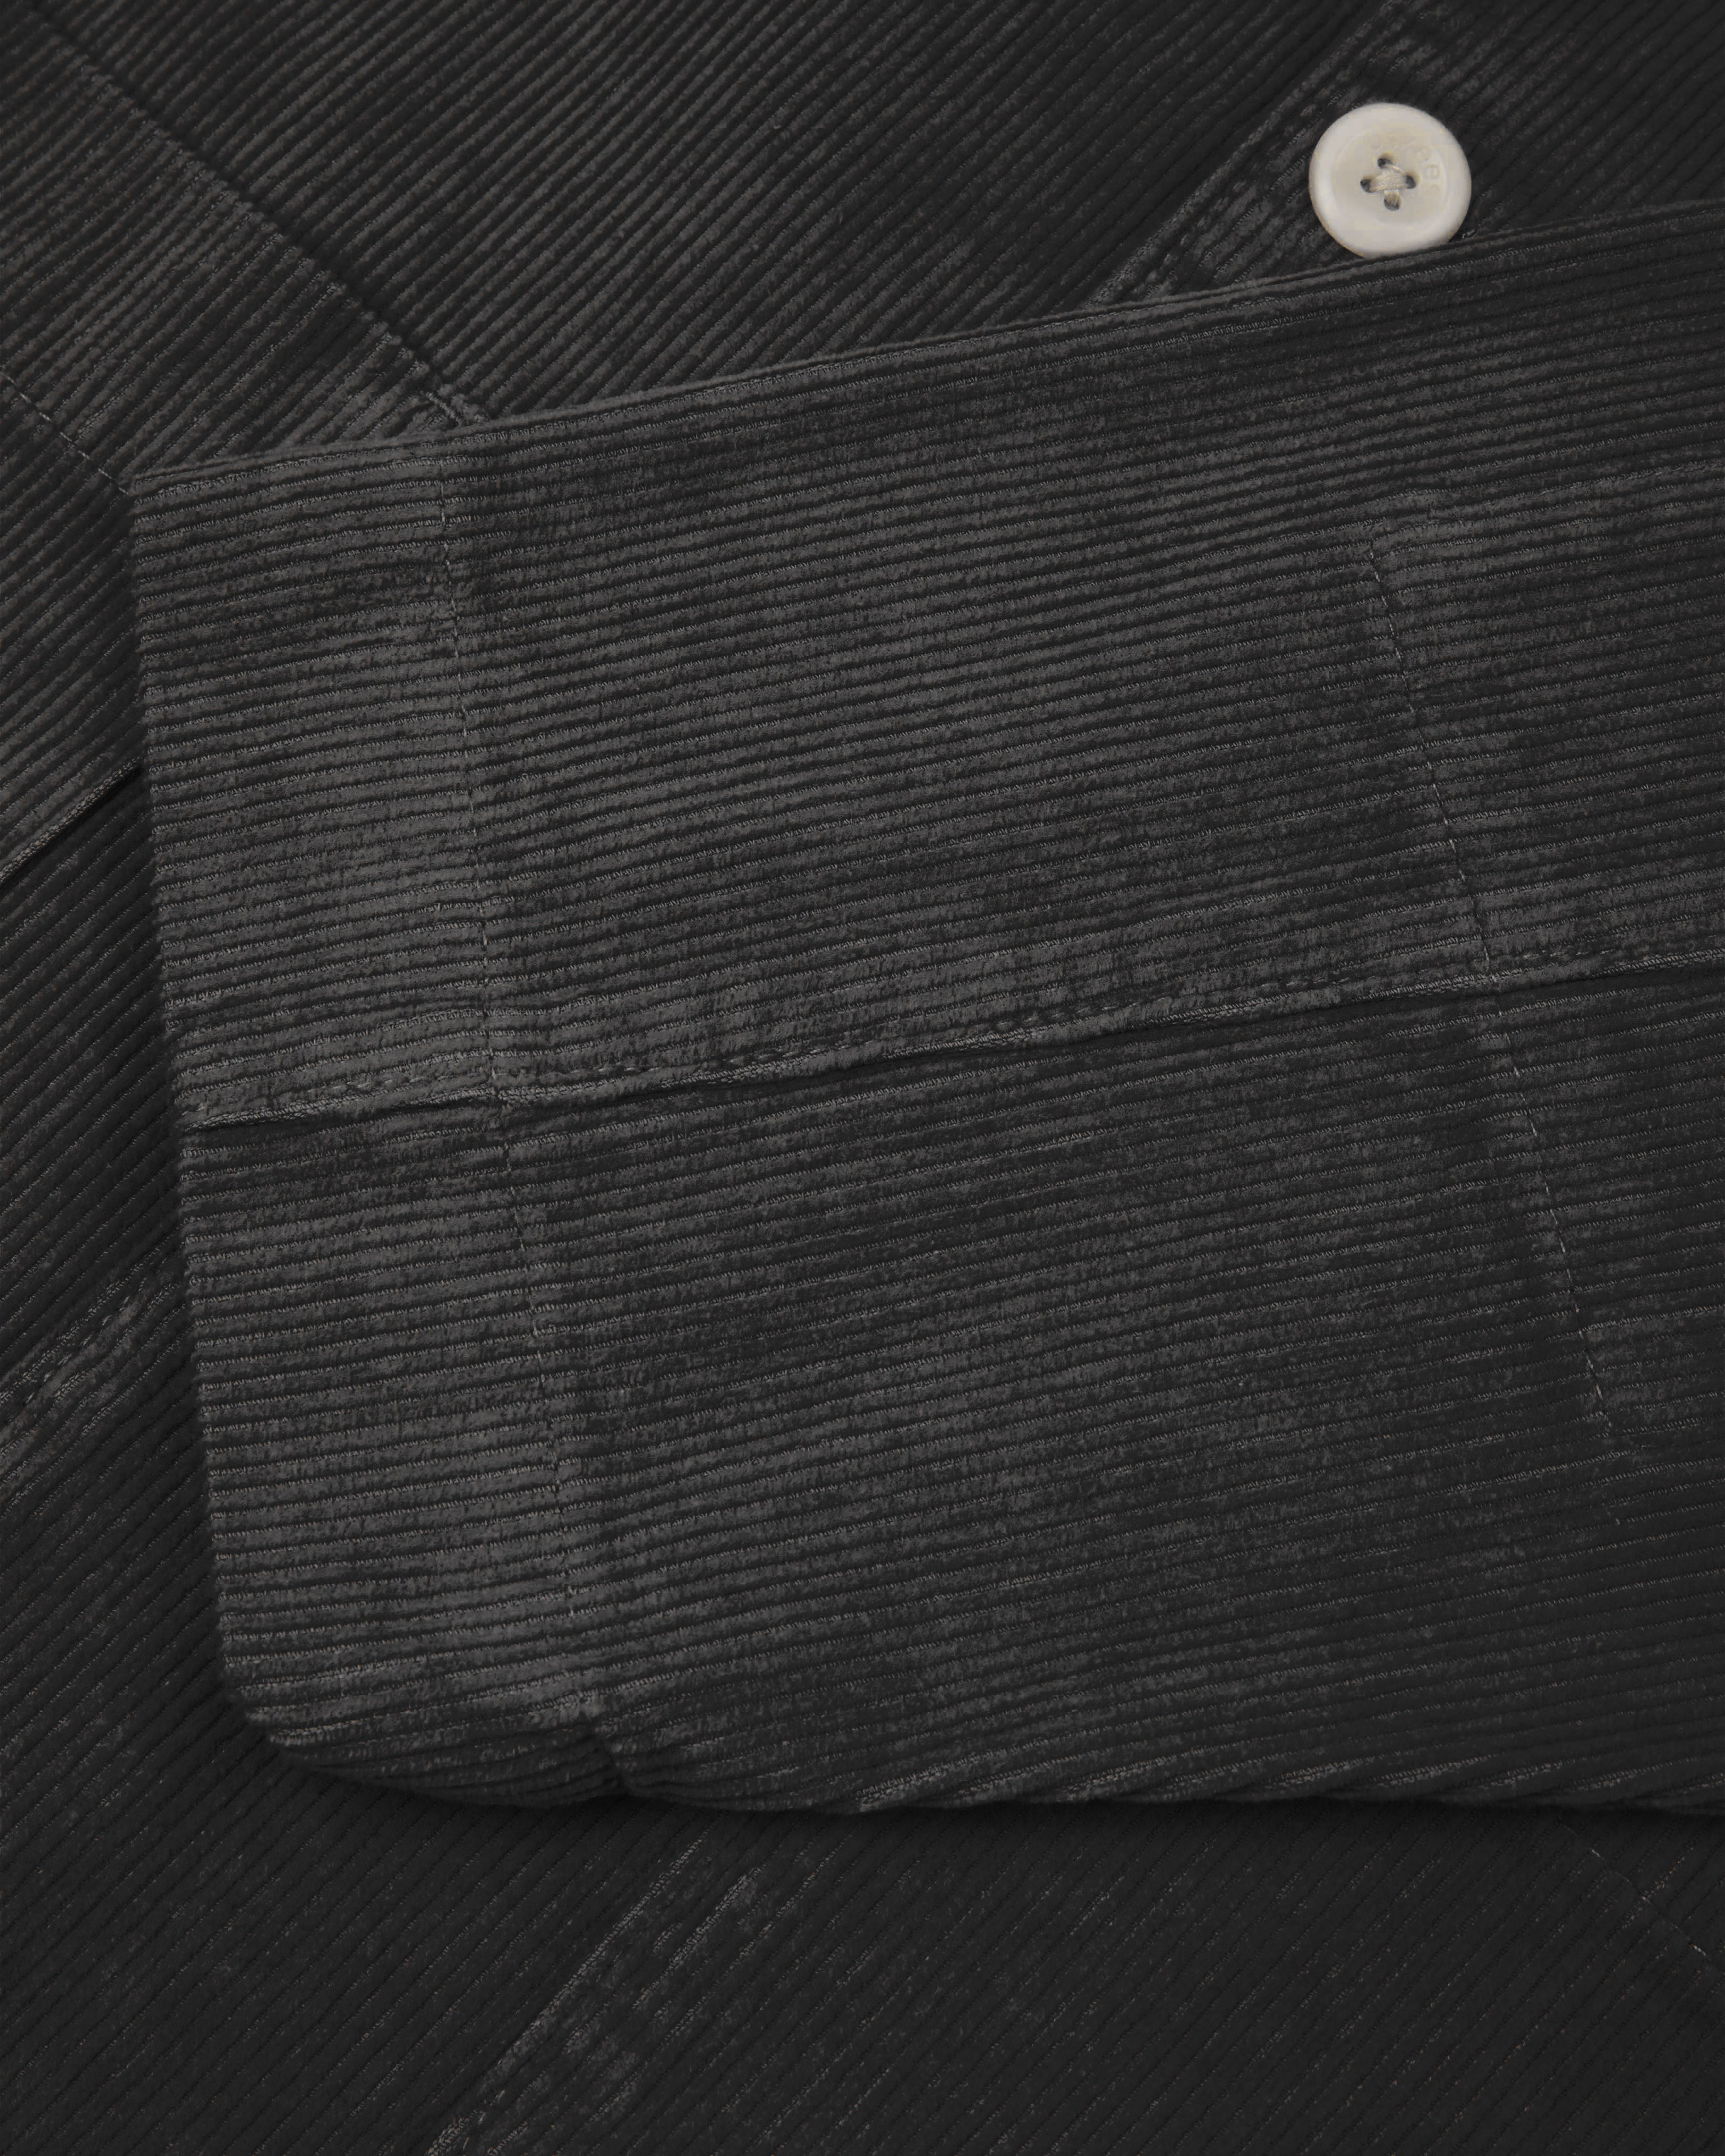 Flat front close view of dark grey #3006 corduroy blazer with view of cuff/sleeve and contrast corozo button.